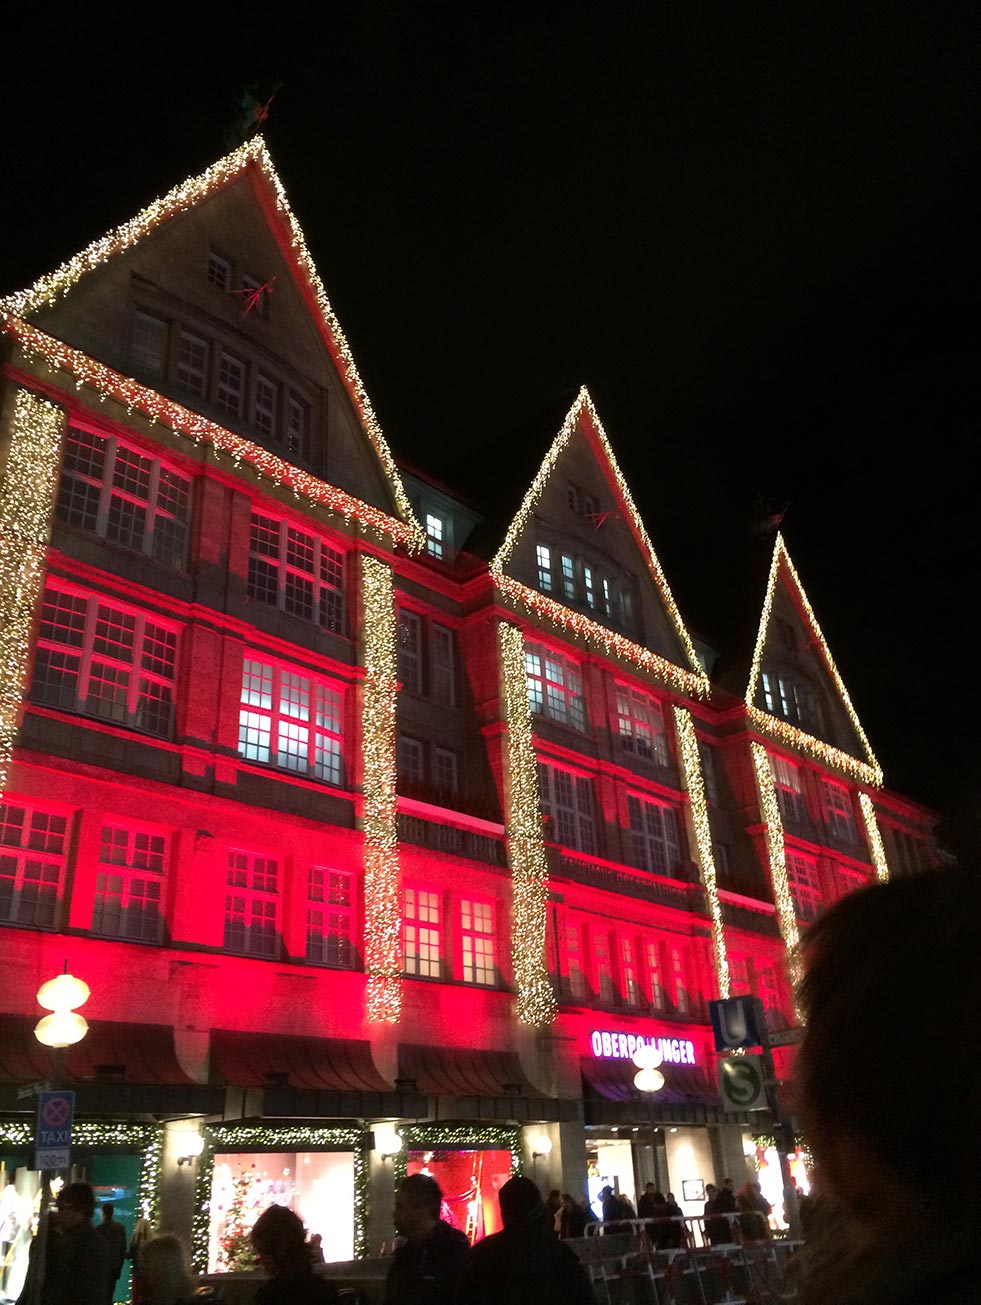 Lit up buildings in Munich, Germany during Christmas.